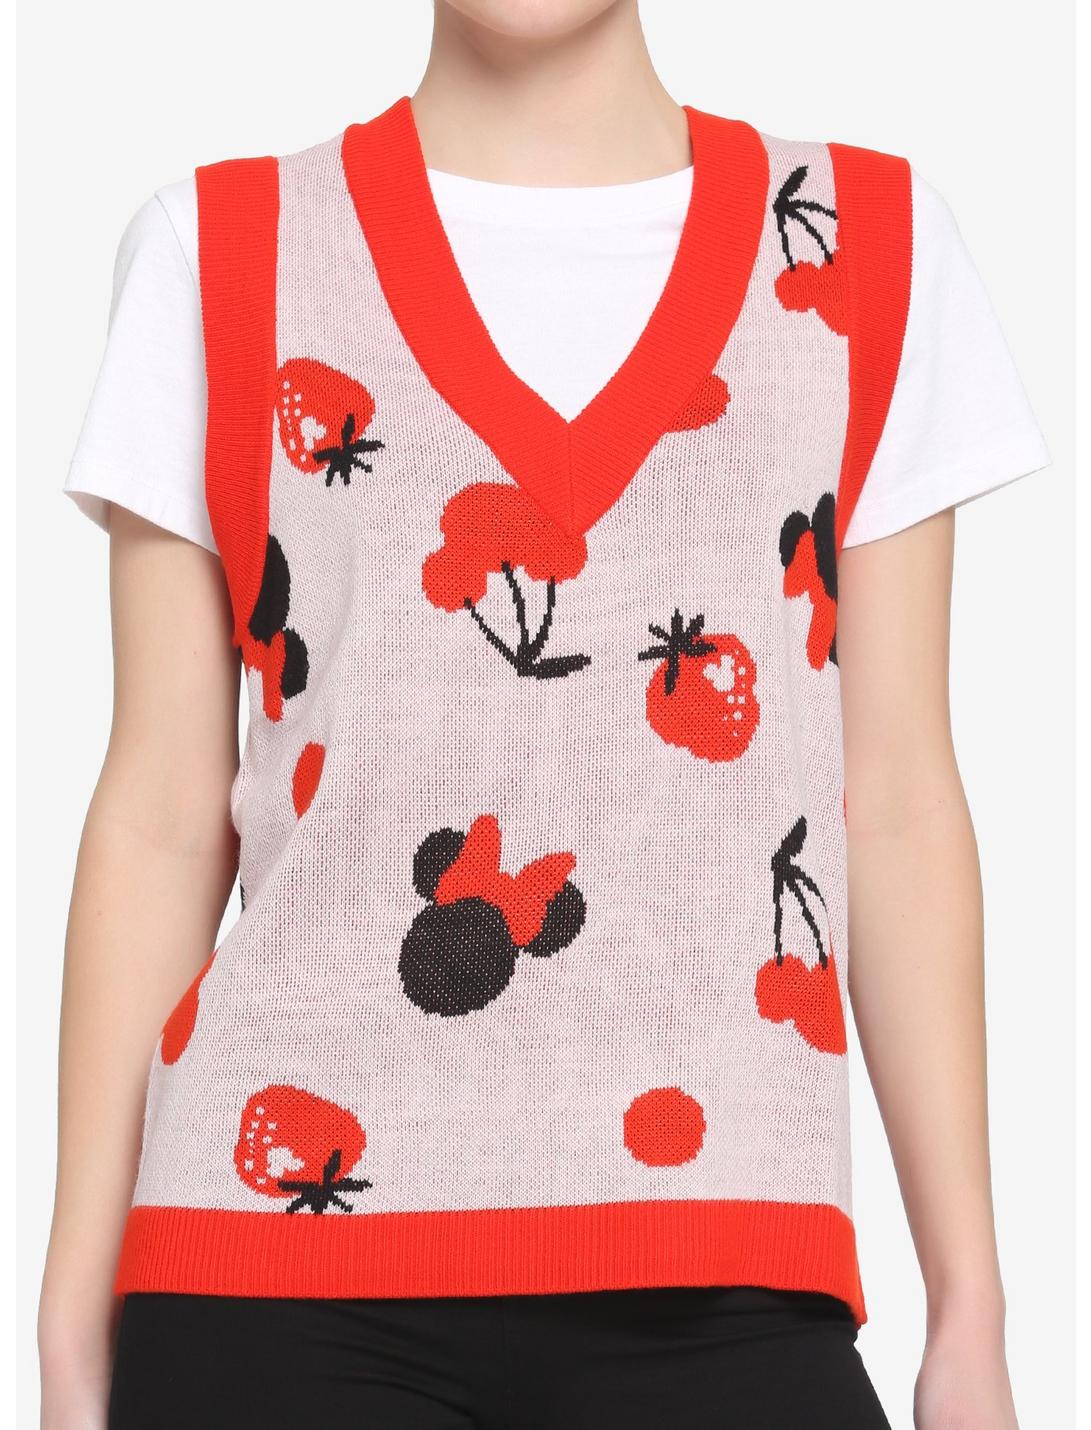 DISNEY MINNIE MOUSE T-SHIRT Infants Girls My perfect day Sleeveless VEST 